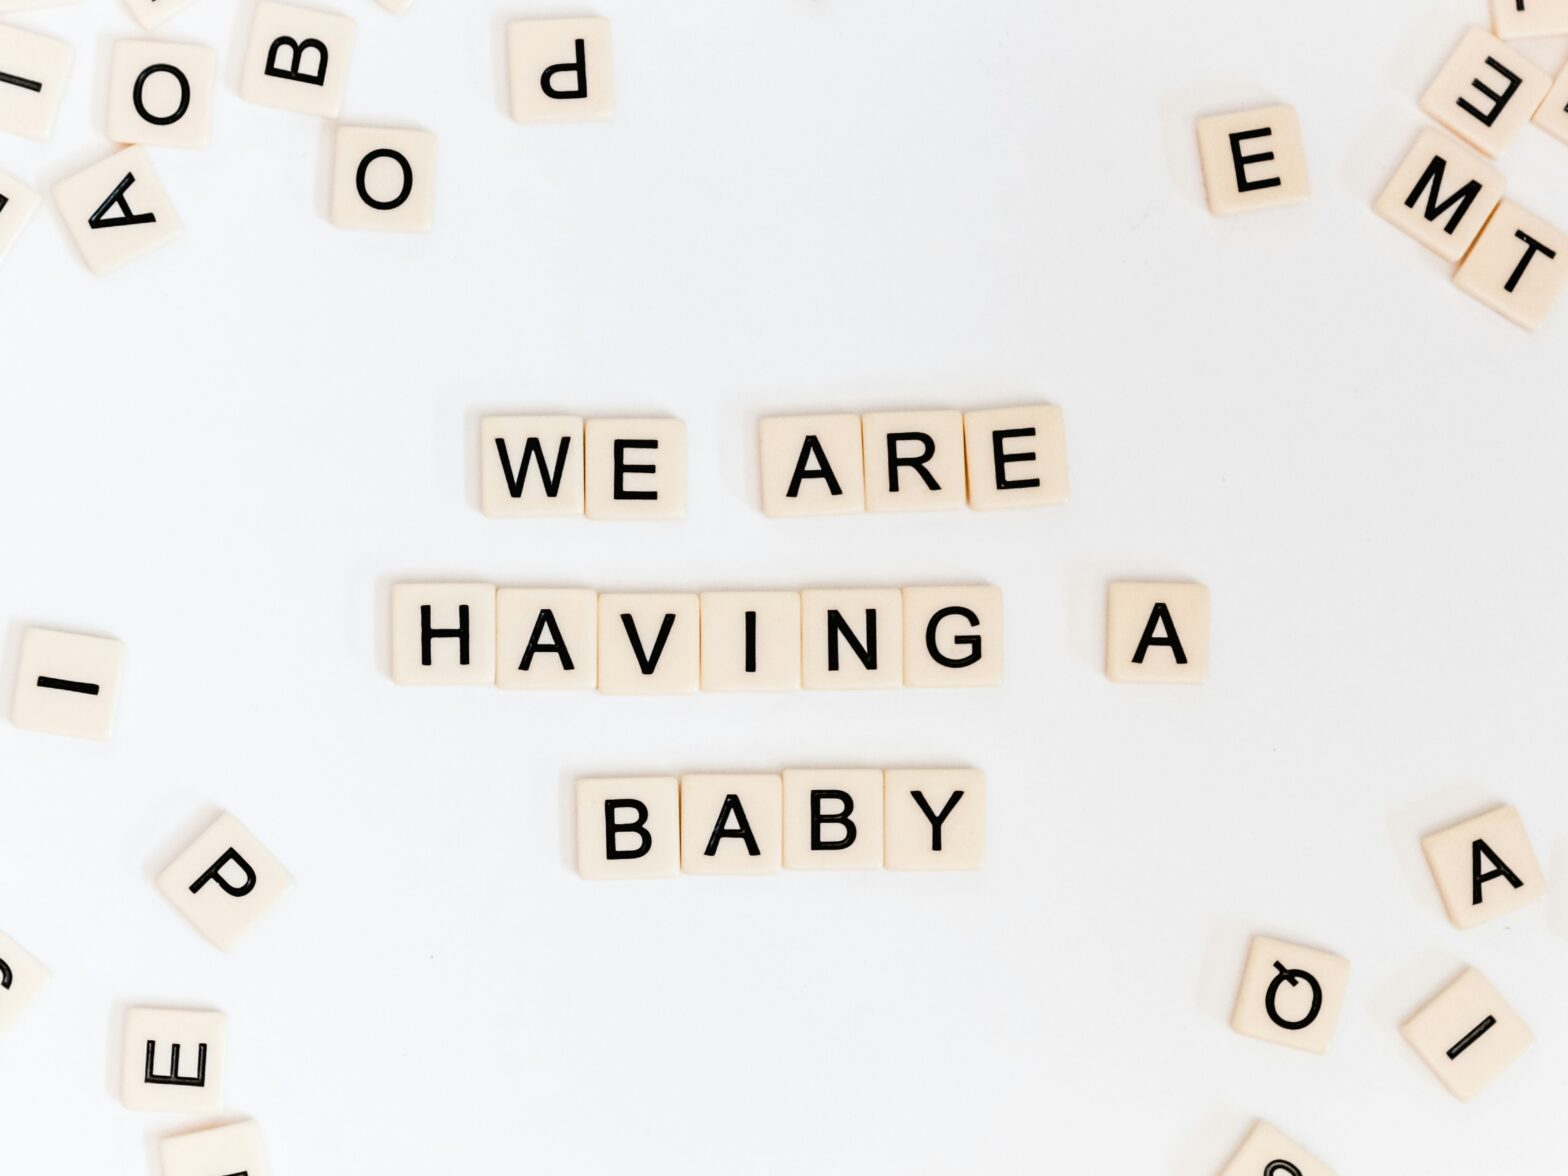 Fun and creative ways to announce a pregnancy to your partner